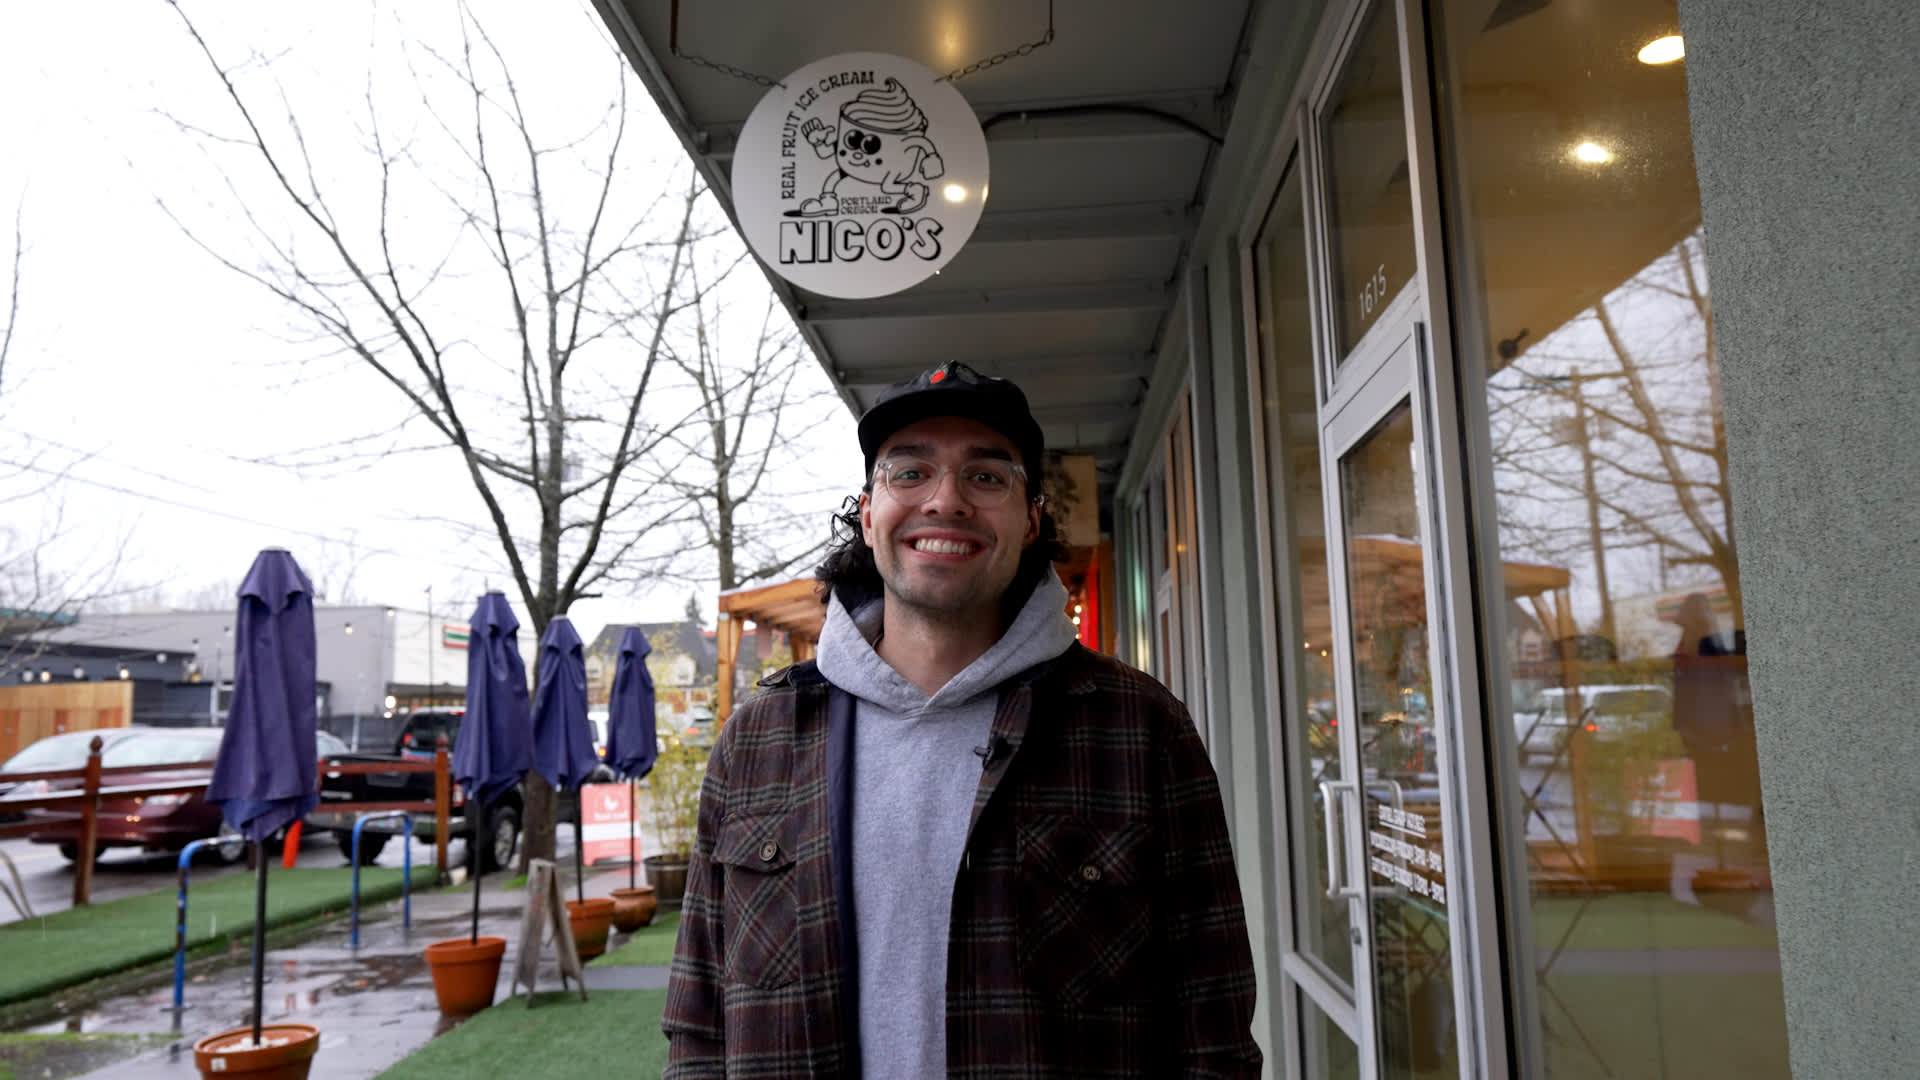 23-year-old spent $35,000 setting up an ice cream business in Oregon—now it brings in $650,000 a year